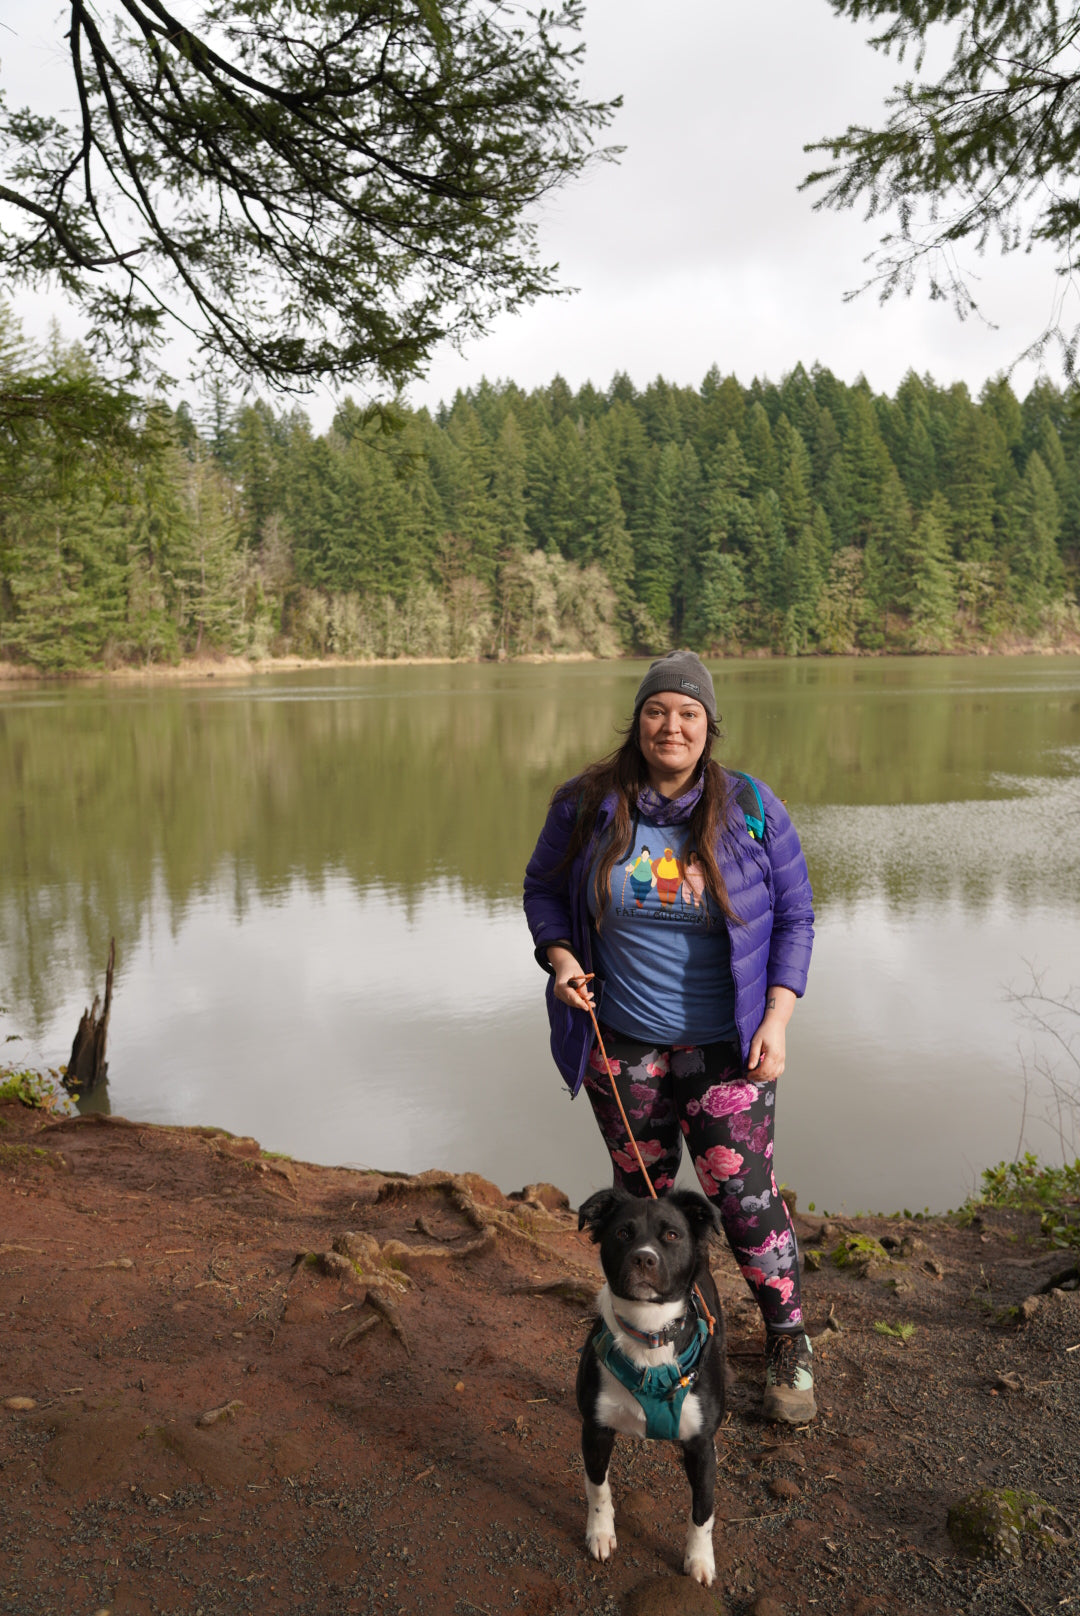 Jenny Bruso with dog in Flagline harness by the water on a hike.